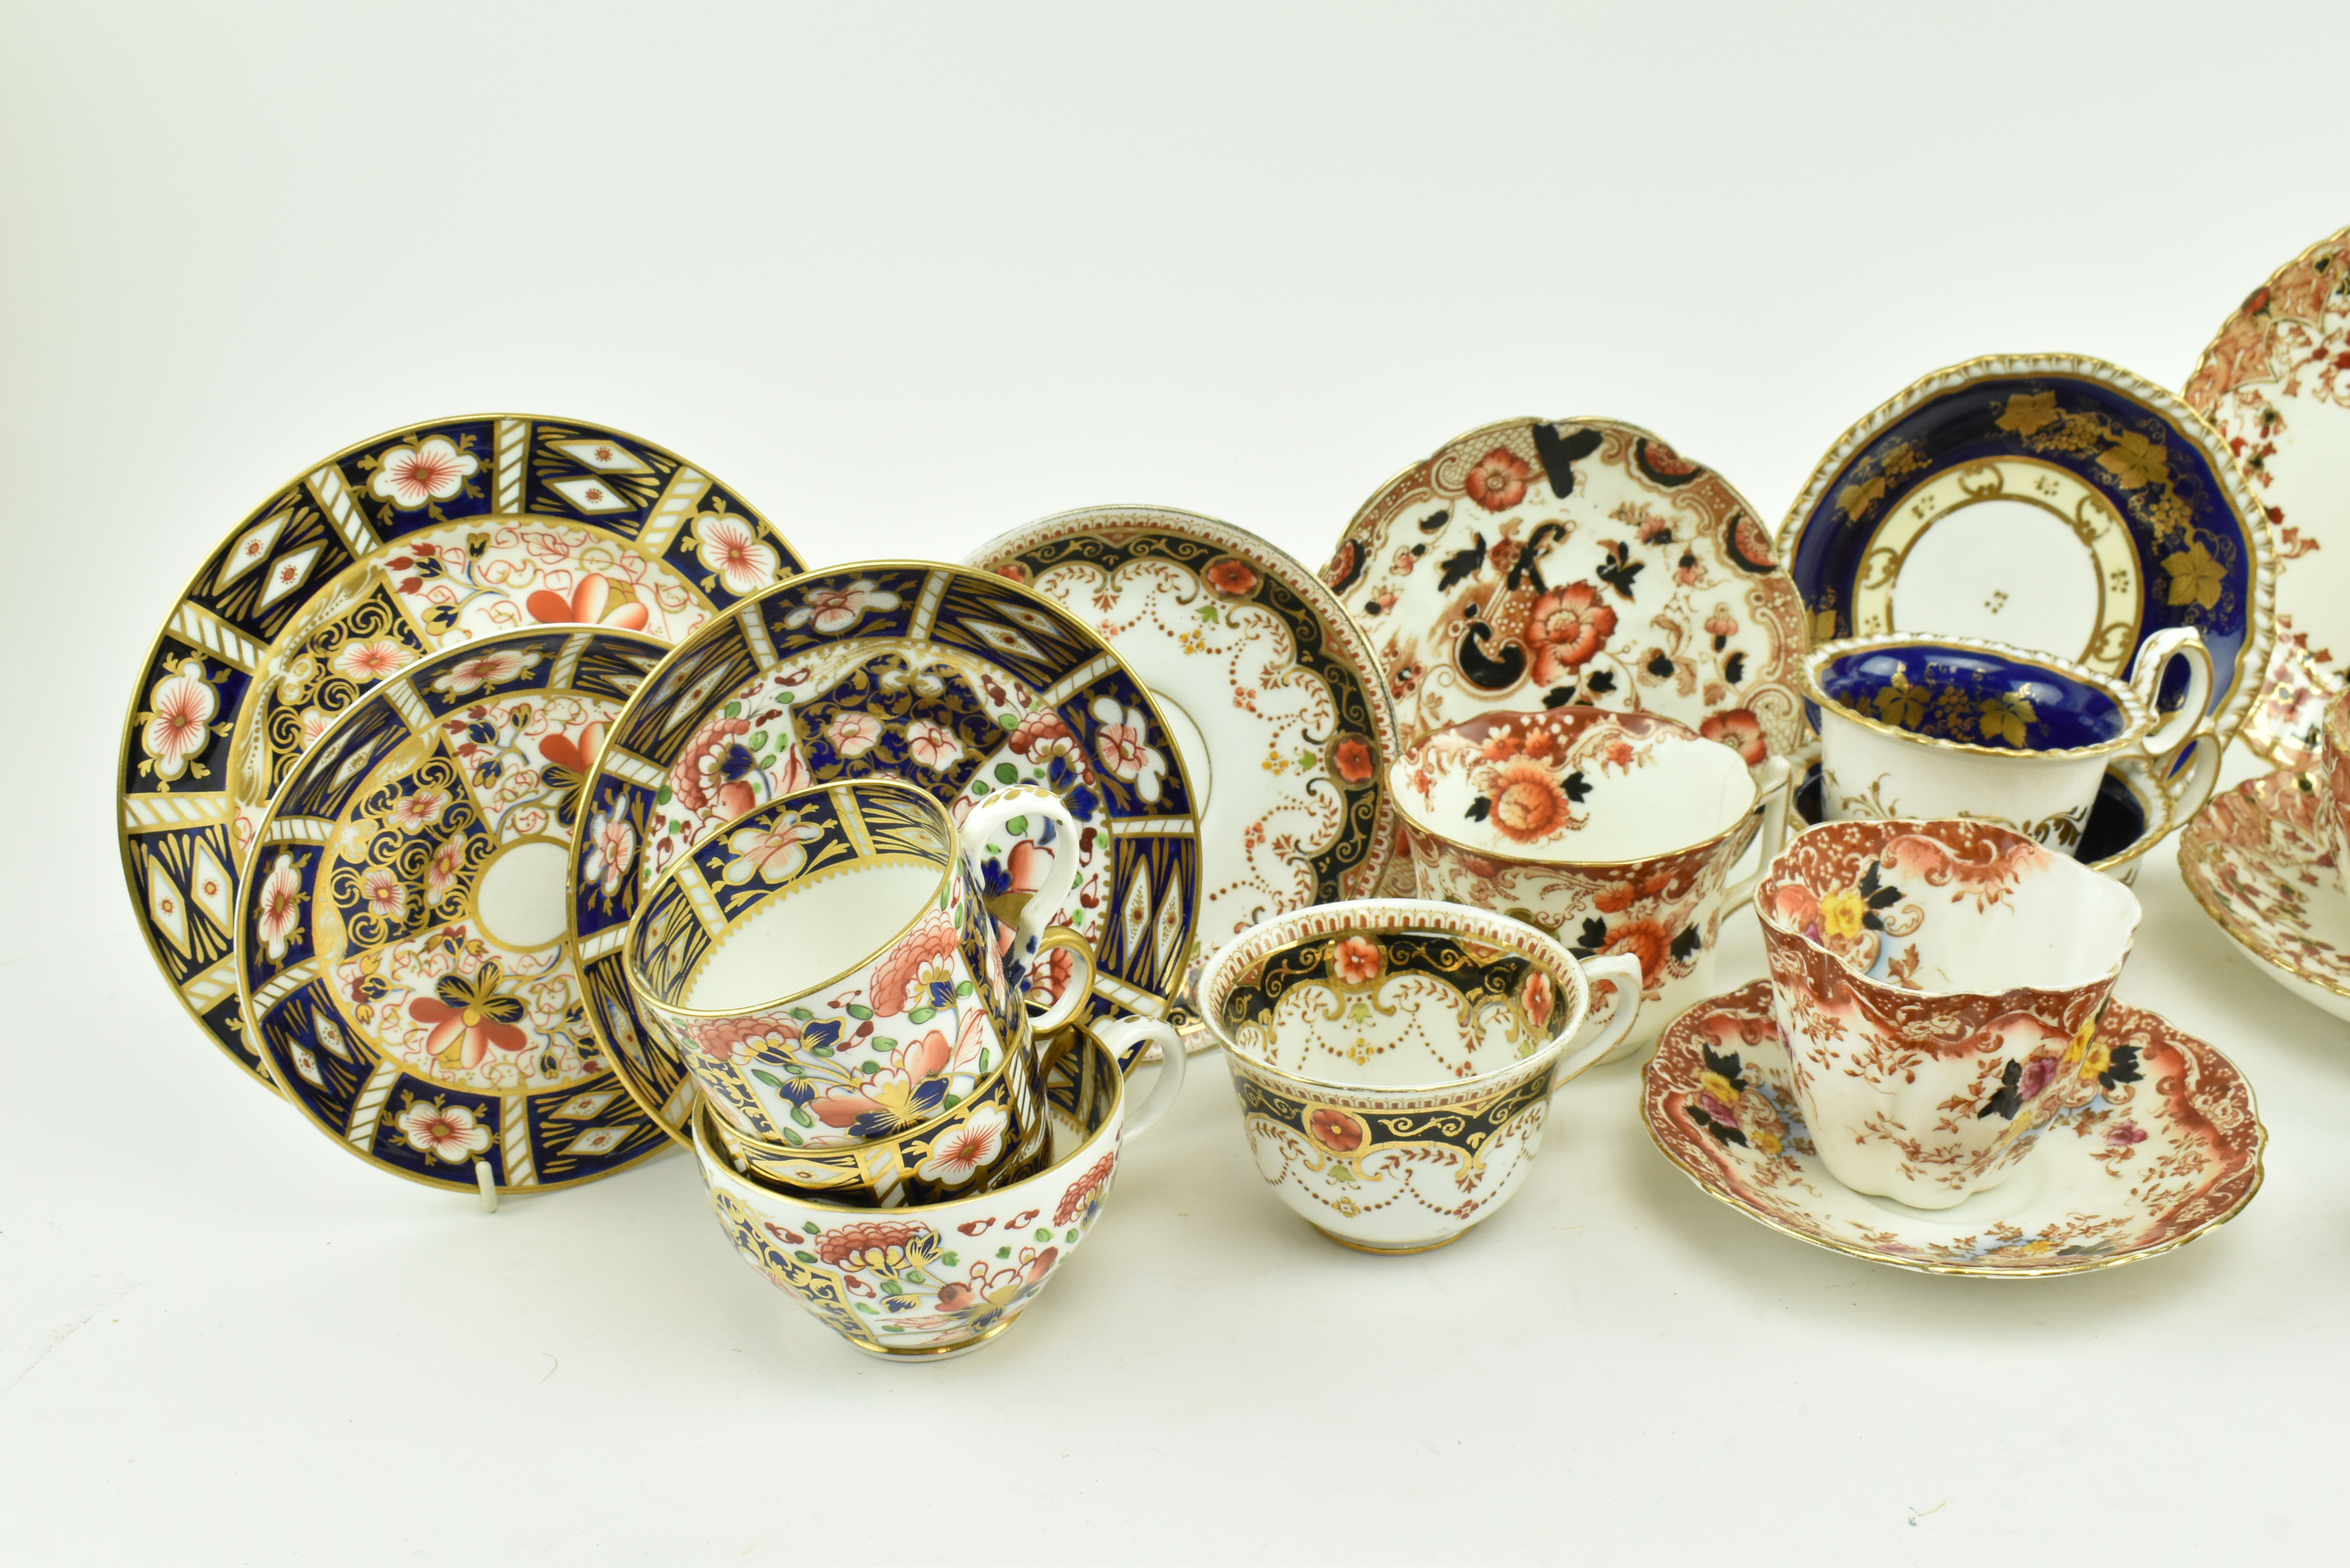 COLLECTION OF 19TH CENTURY PORCELAIN TEACUPS & SAUCERS - Image 2 of 13